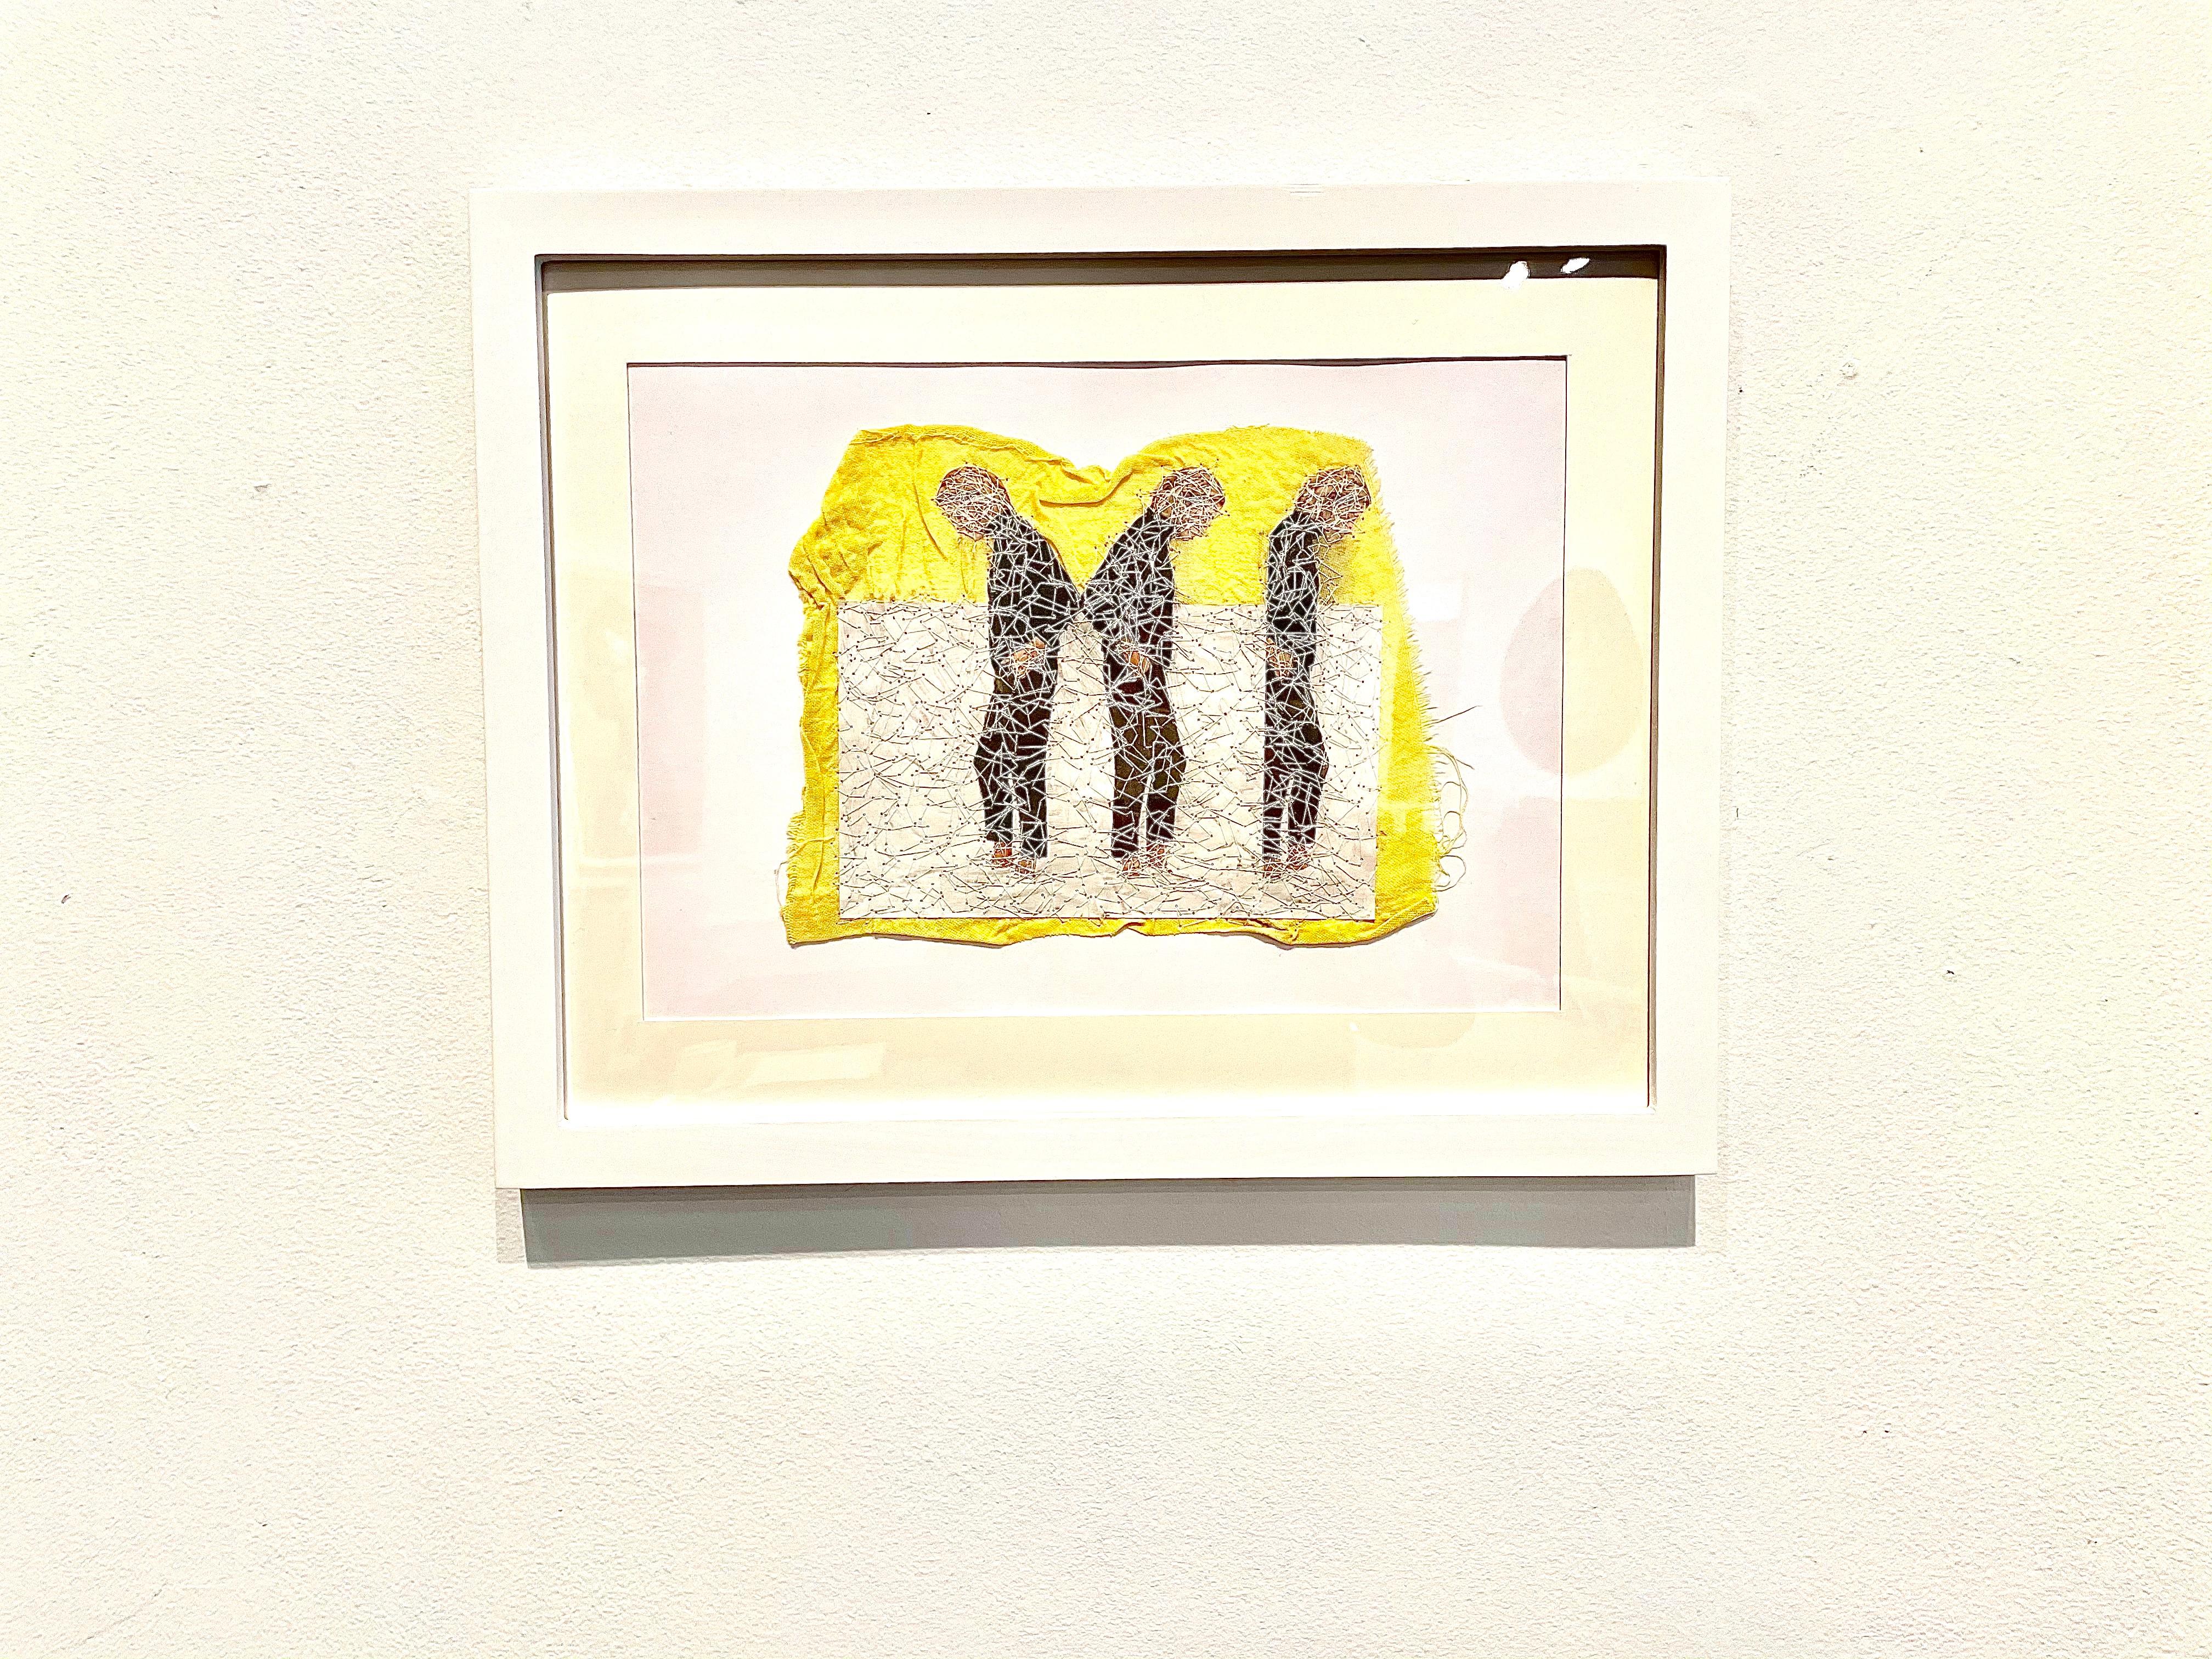 She 50 - yellow contemporary embroidered photo transfer of women on fabric - Contemporary Mixed Media Art by Michele Landel